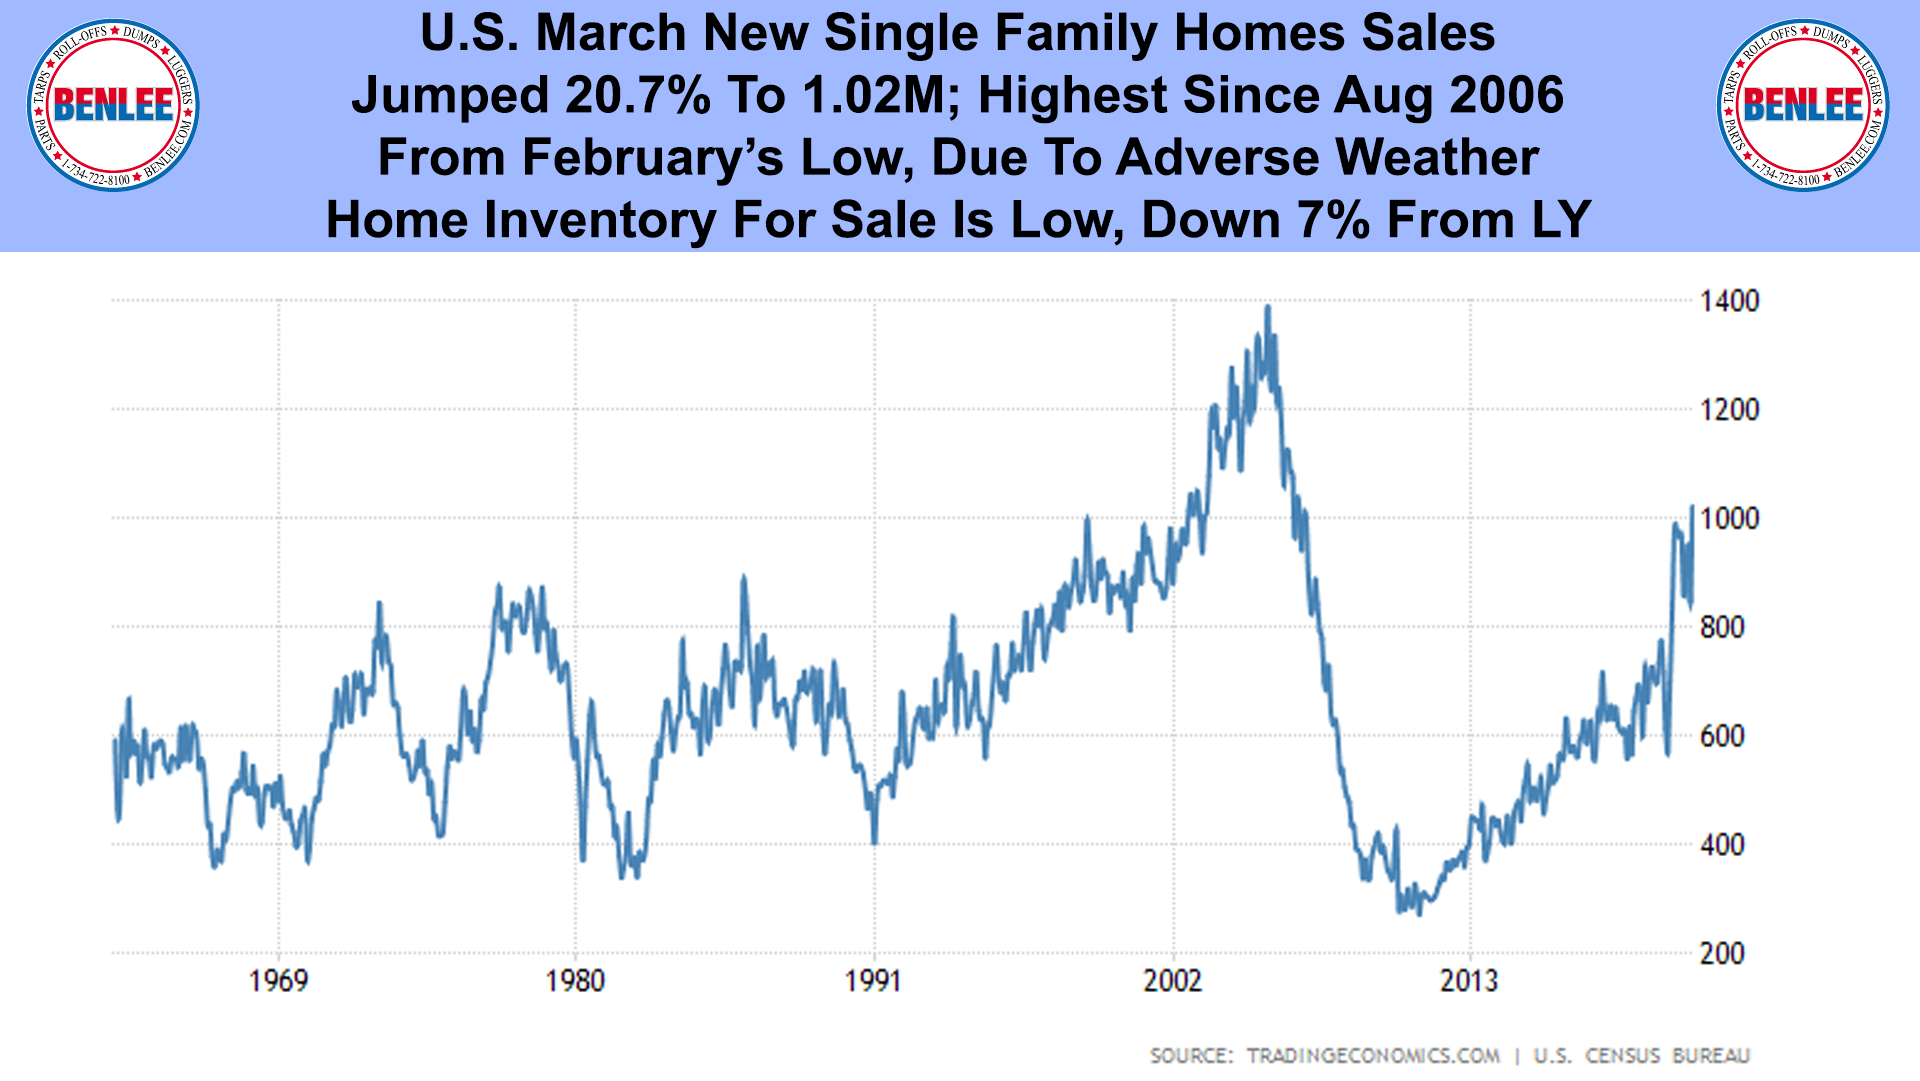 U.S. March New Single Family Homes Sales